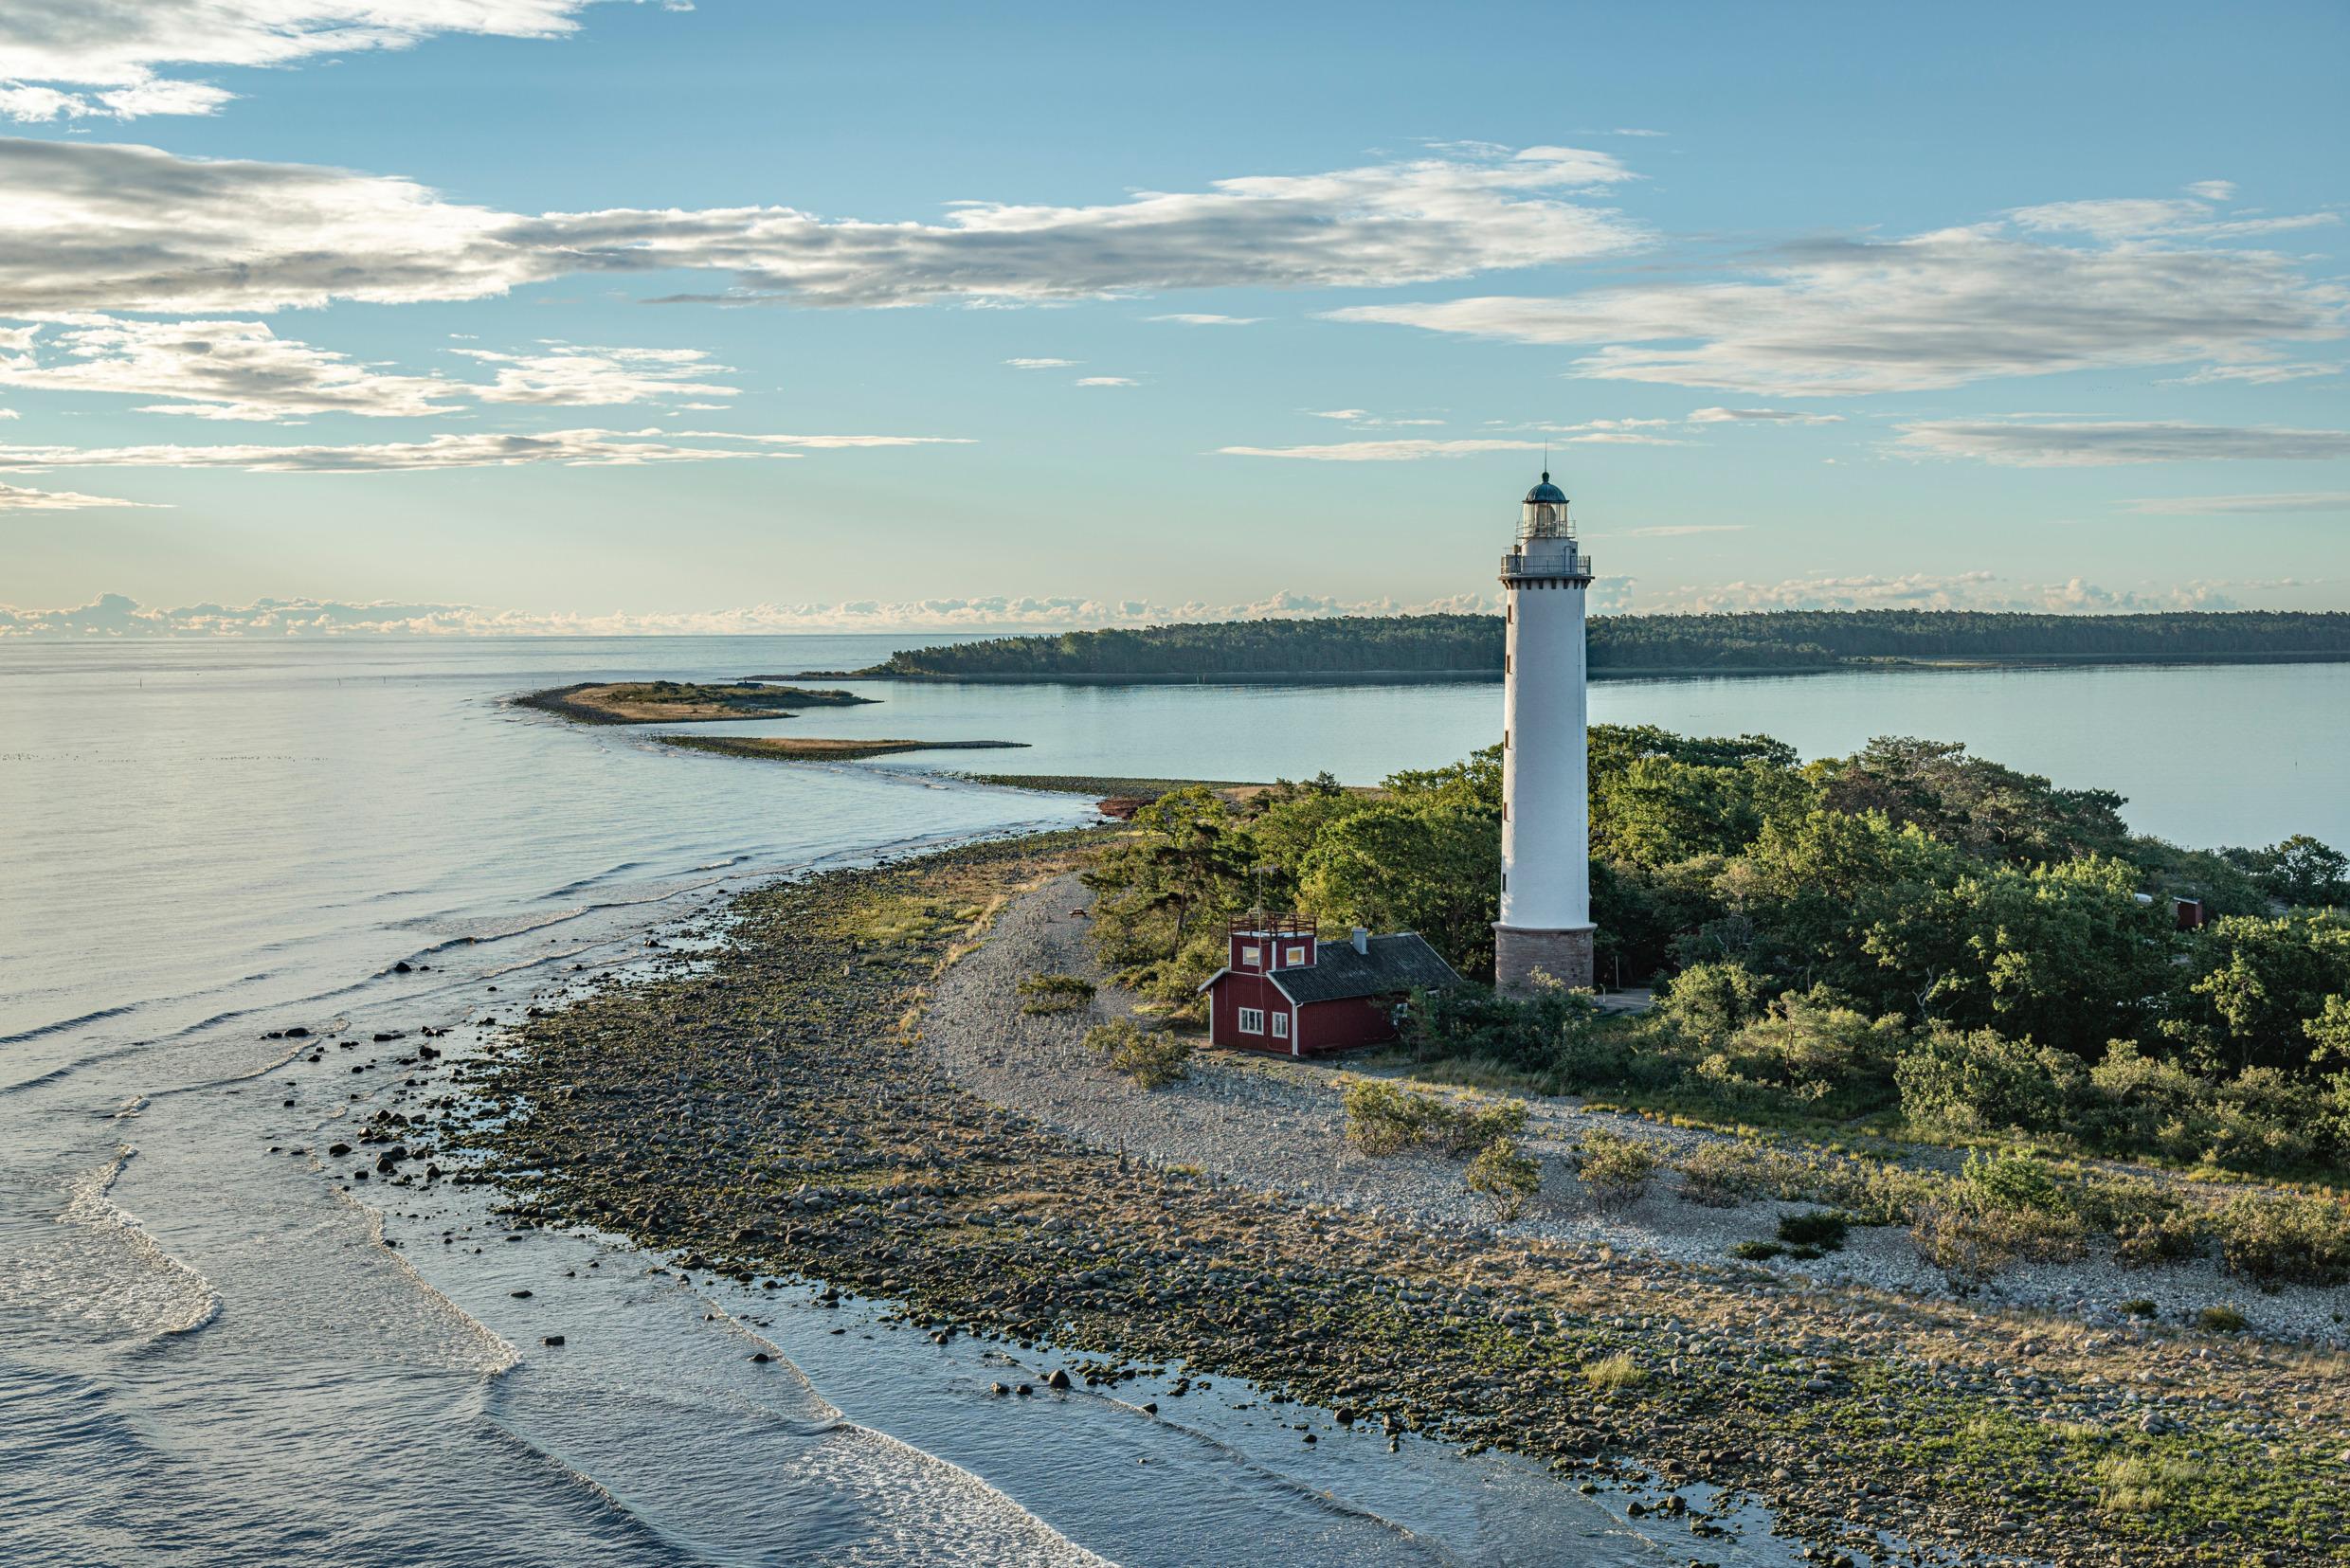 A lighthouse on an islet in the Baltic Sea.